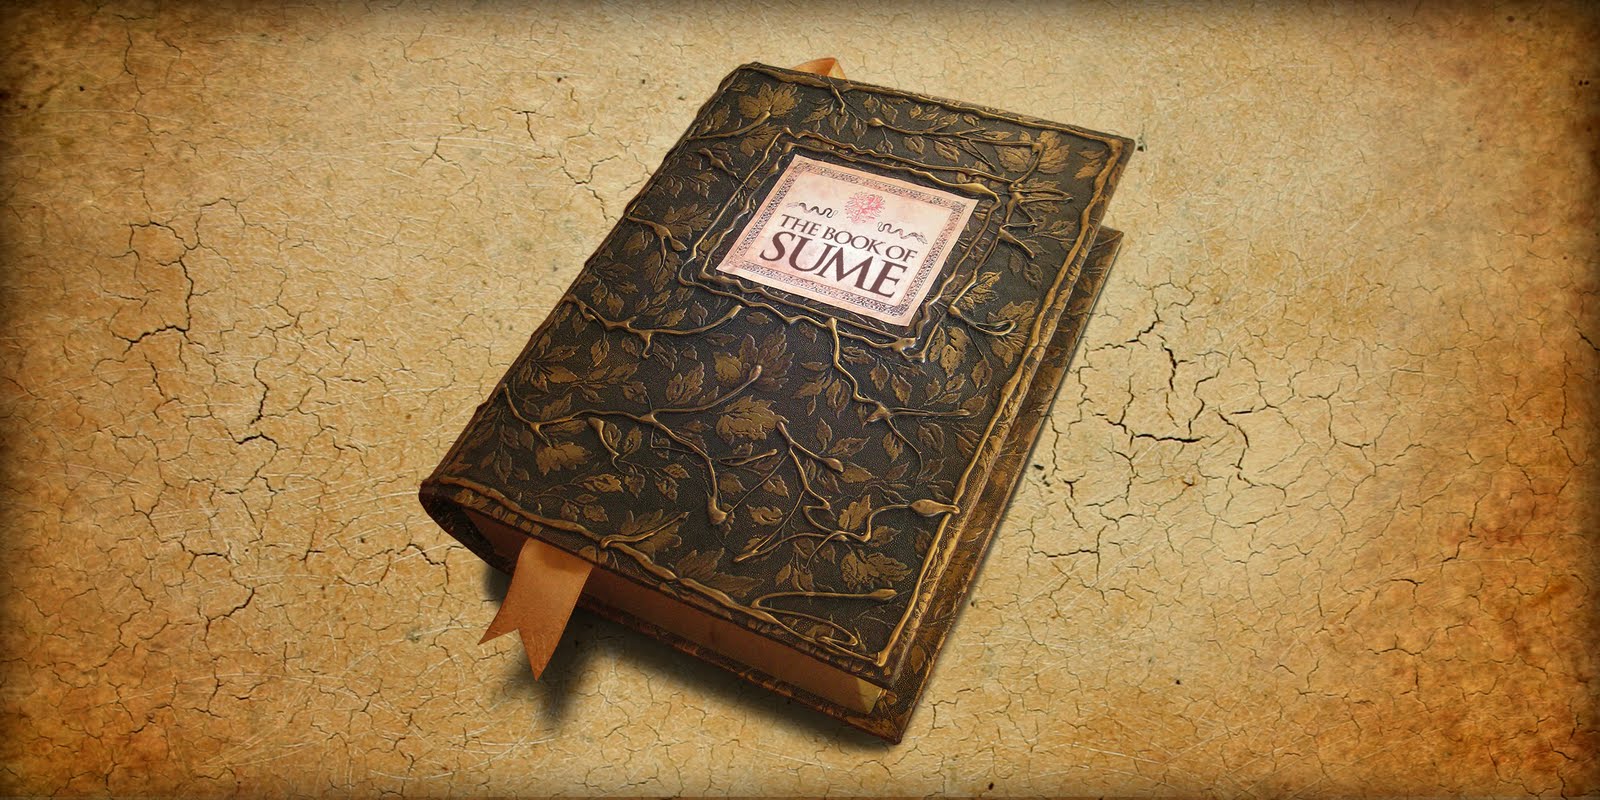 Book of Sume